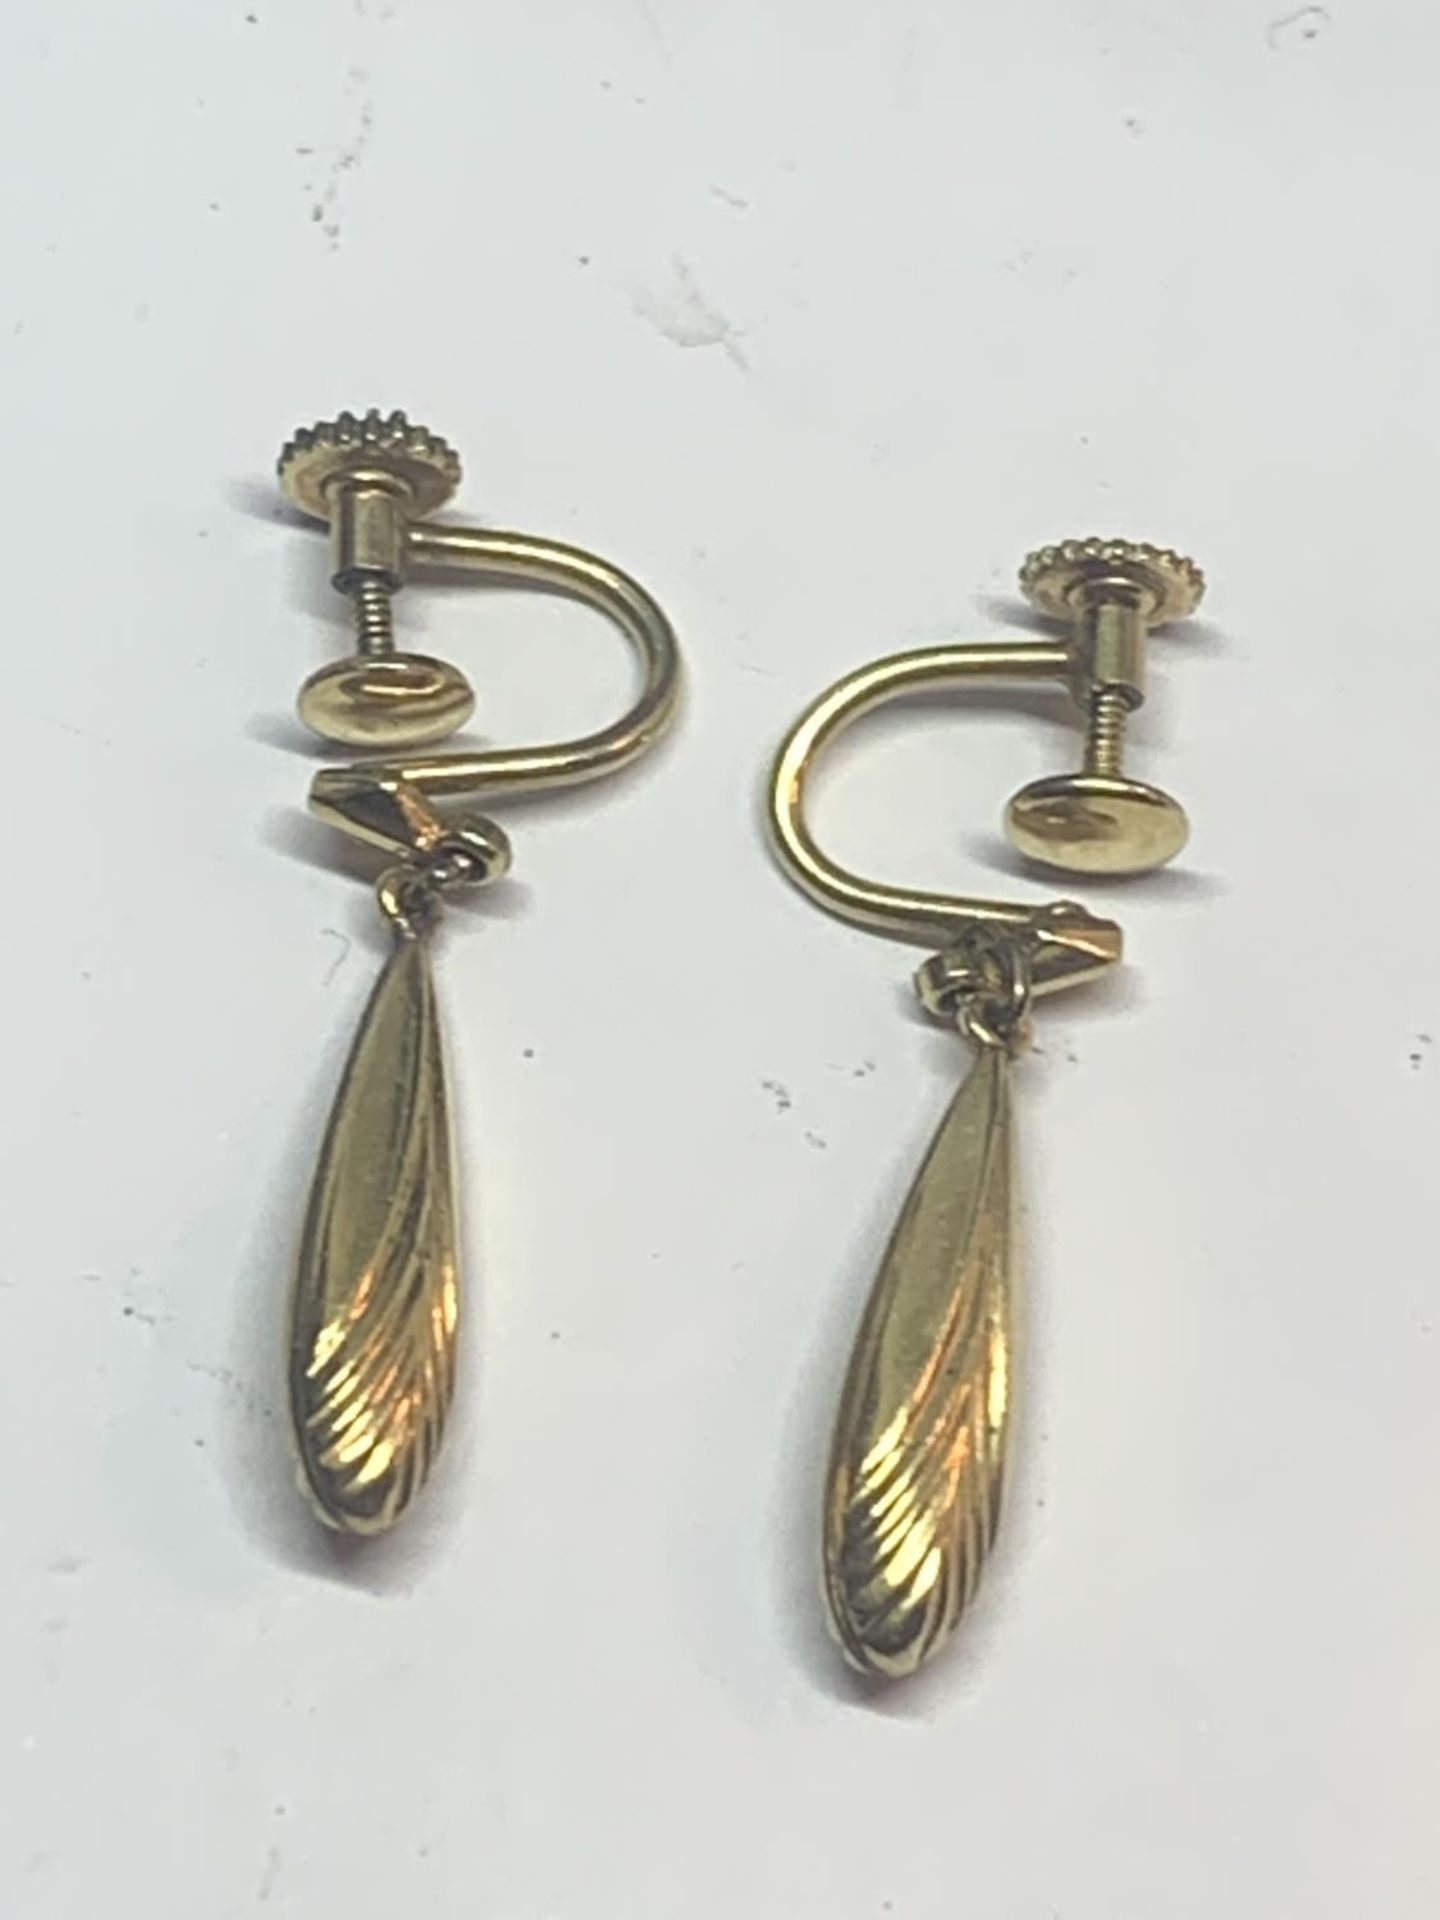 A PAIR OF YELLOW METAL EARRINGS IN A PRESENTATION BOX - Image 2 of 2